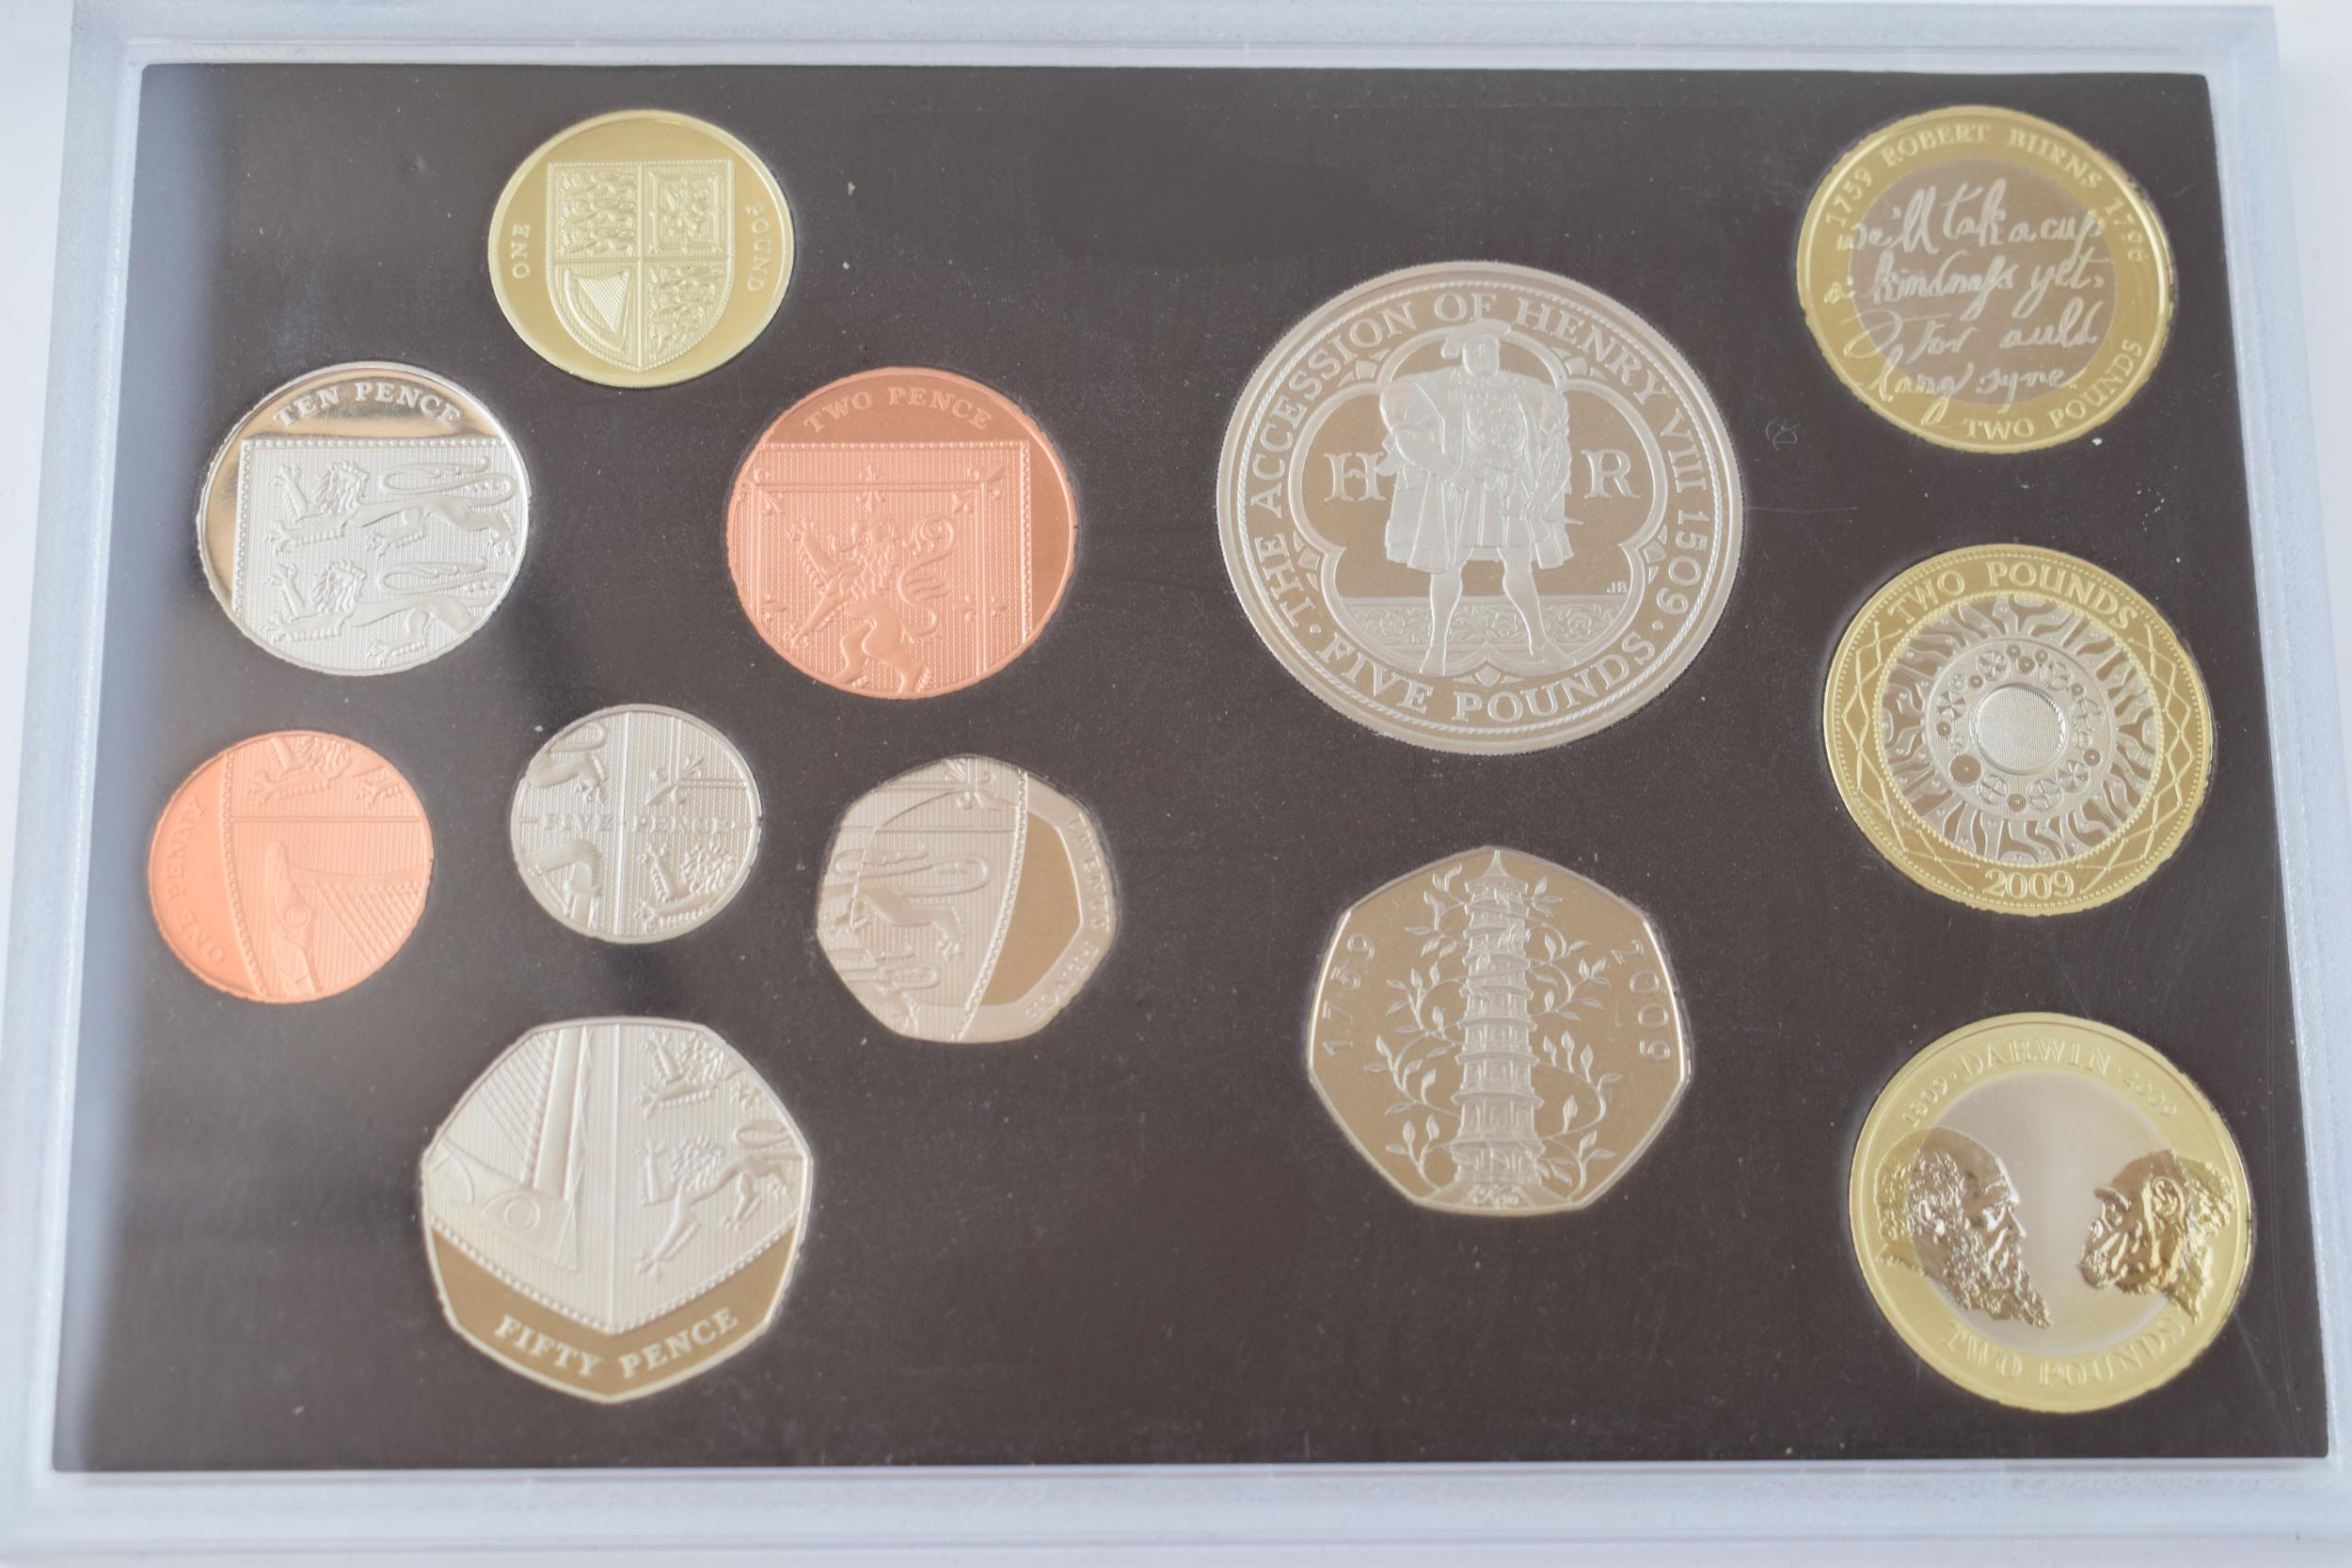 2009 UK Proof Coin set, 12 coins from £5-1p, including the 'Kew Gardens' 50p; in Royal Mint box with - Image 2 of 4